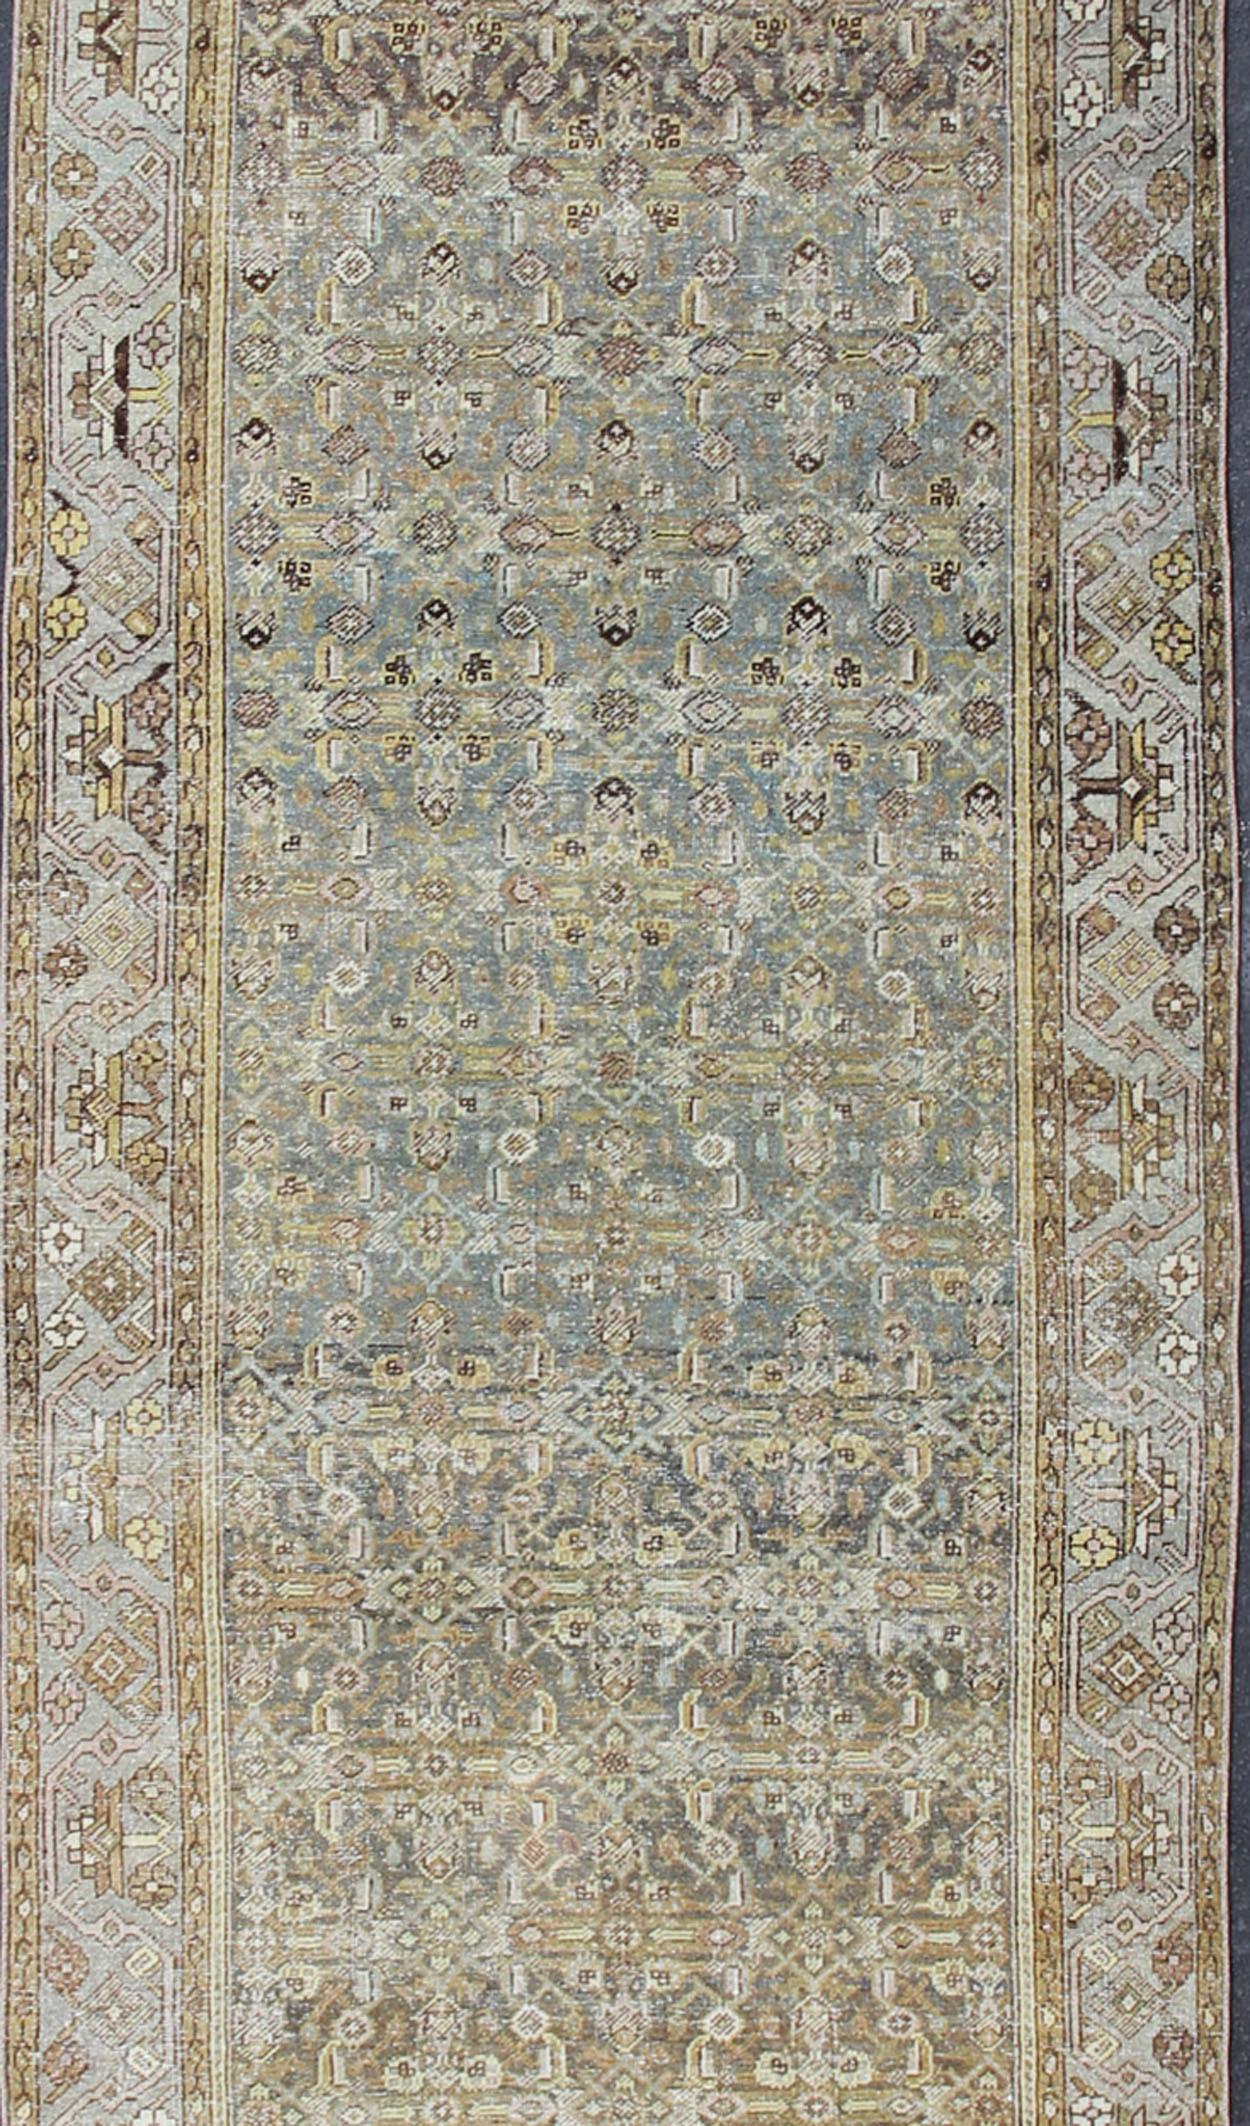 Rare Persian Malayer antique wide runner with all-over Herati design in dark gray background and variation of blue, yellow green, light gray, soft yellow, rug SUS-2007-38, country of origin / type: Iran / Malayer, circa 1920.

This antique Persian